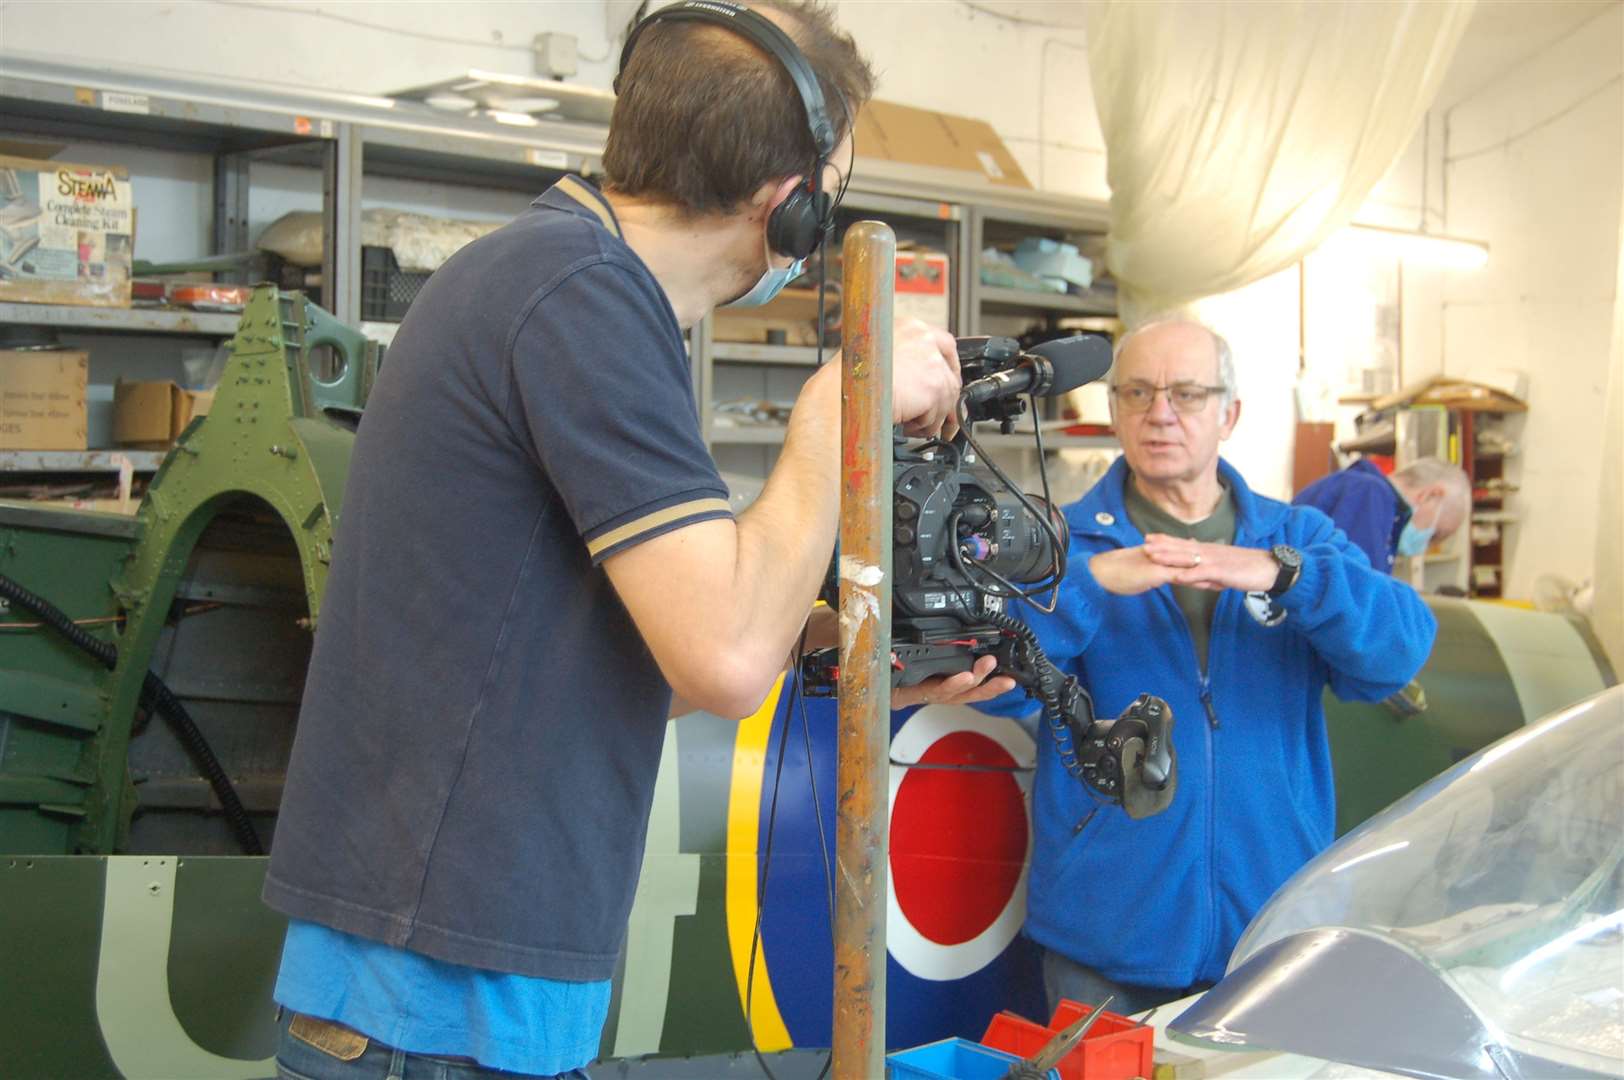 Maps' managing director Philip Cole shows a cameraman their work